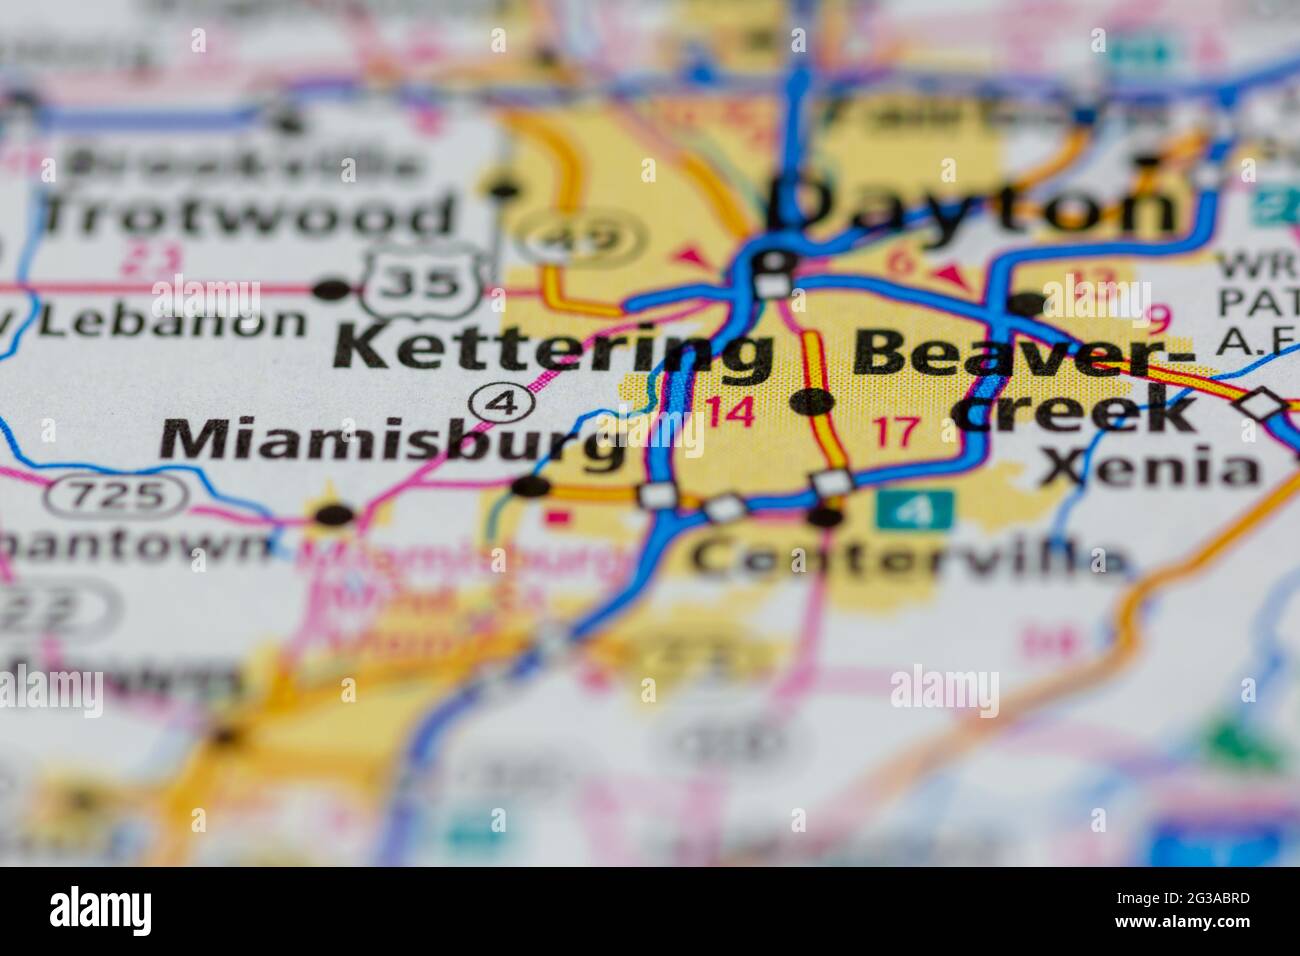 Kettering Ohio USA shown on a Geography map or Road map Stock Photo